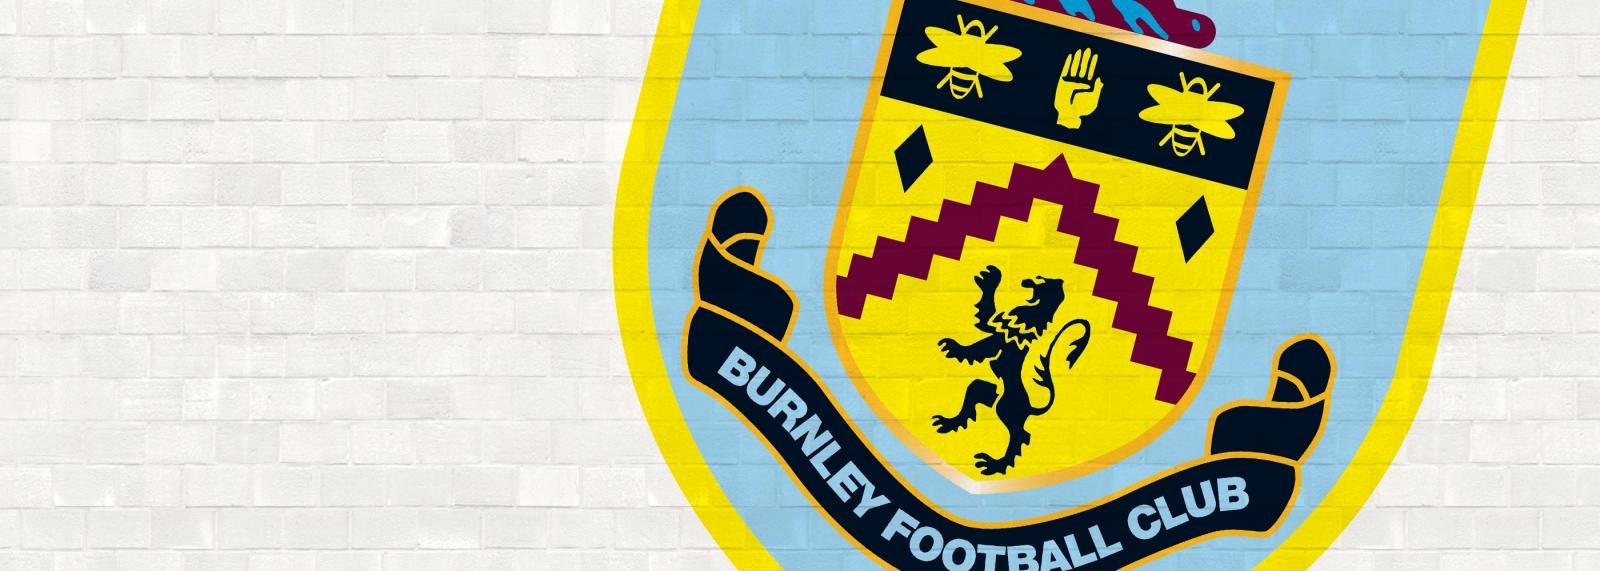 Five wins and a draw, then Burnley will be back in the Premier League